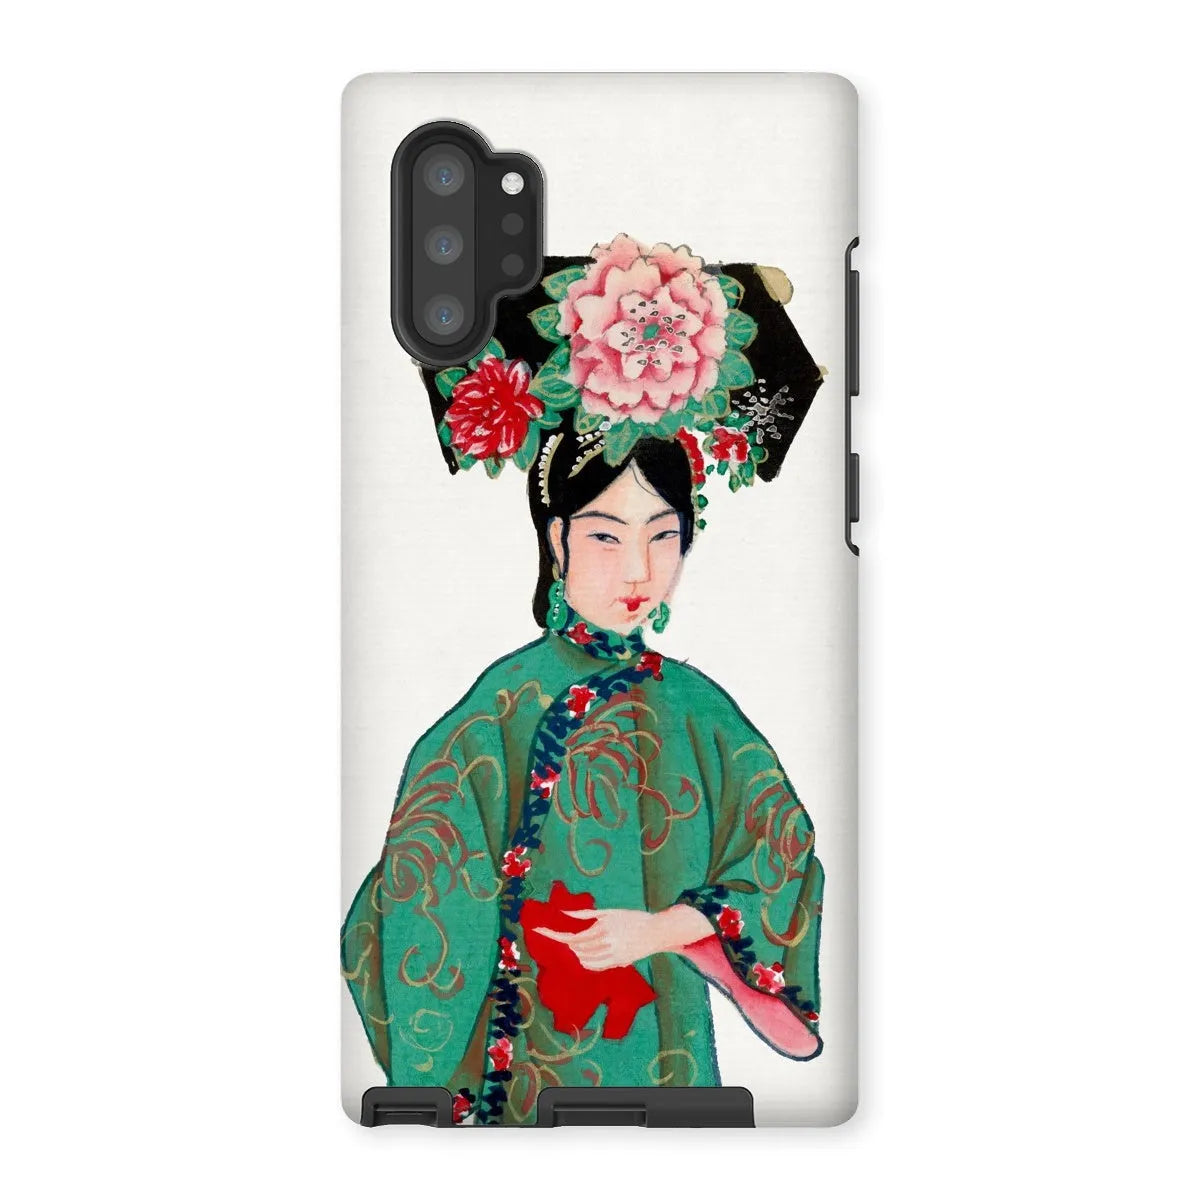 Chinese Noblewoman In Manchu Couture Art Phone Case - Samsung Galaxy Note 10p / Matte - Mobile Phone Cases - Aesthetic